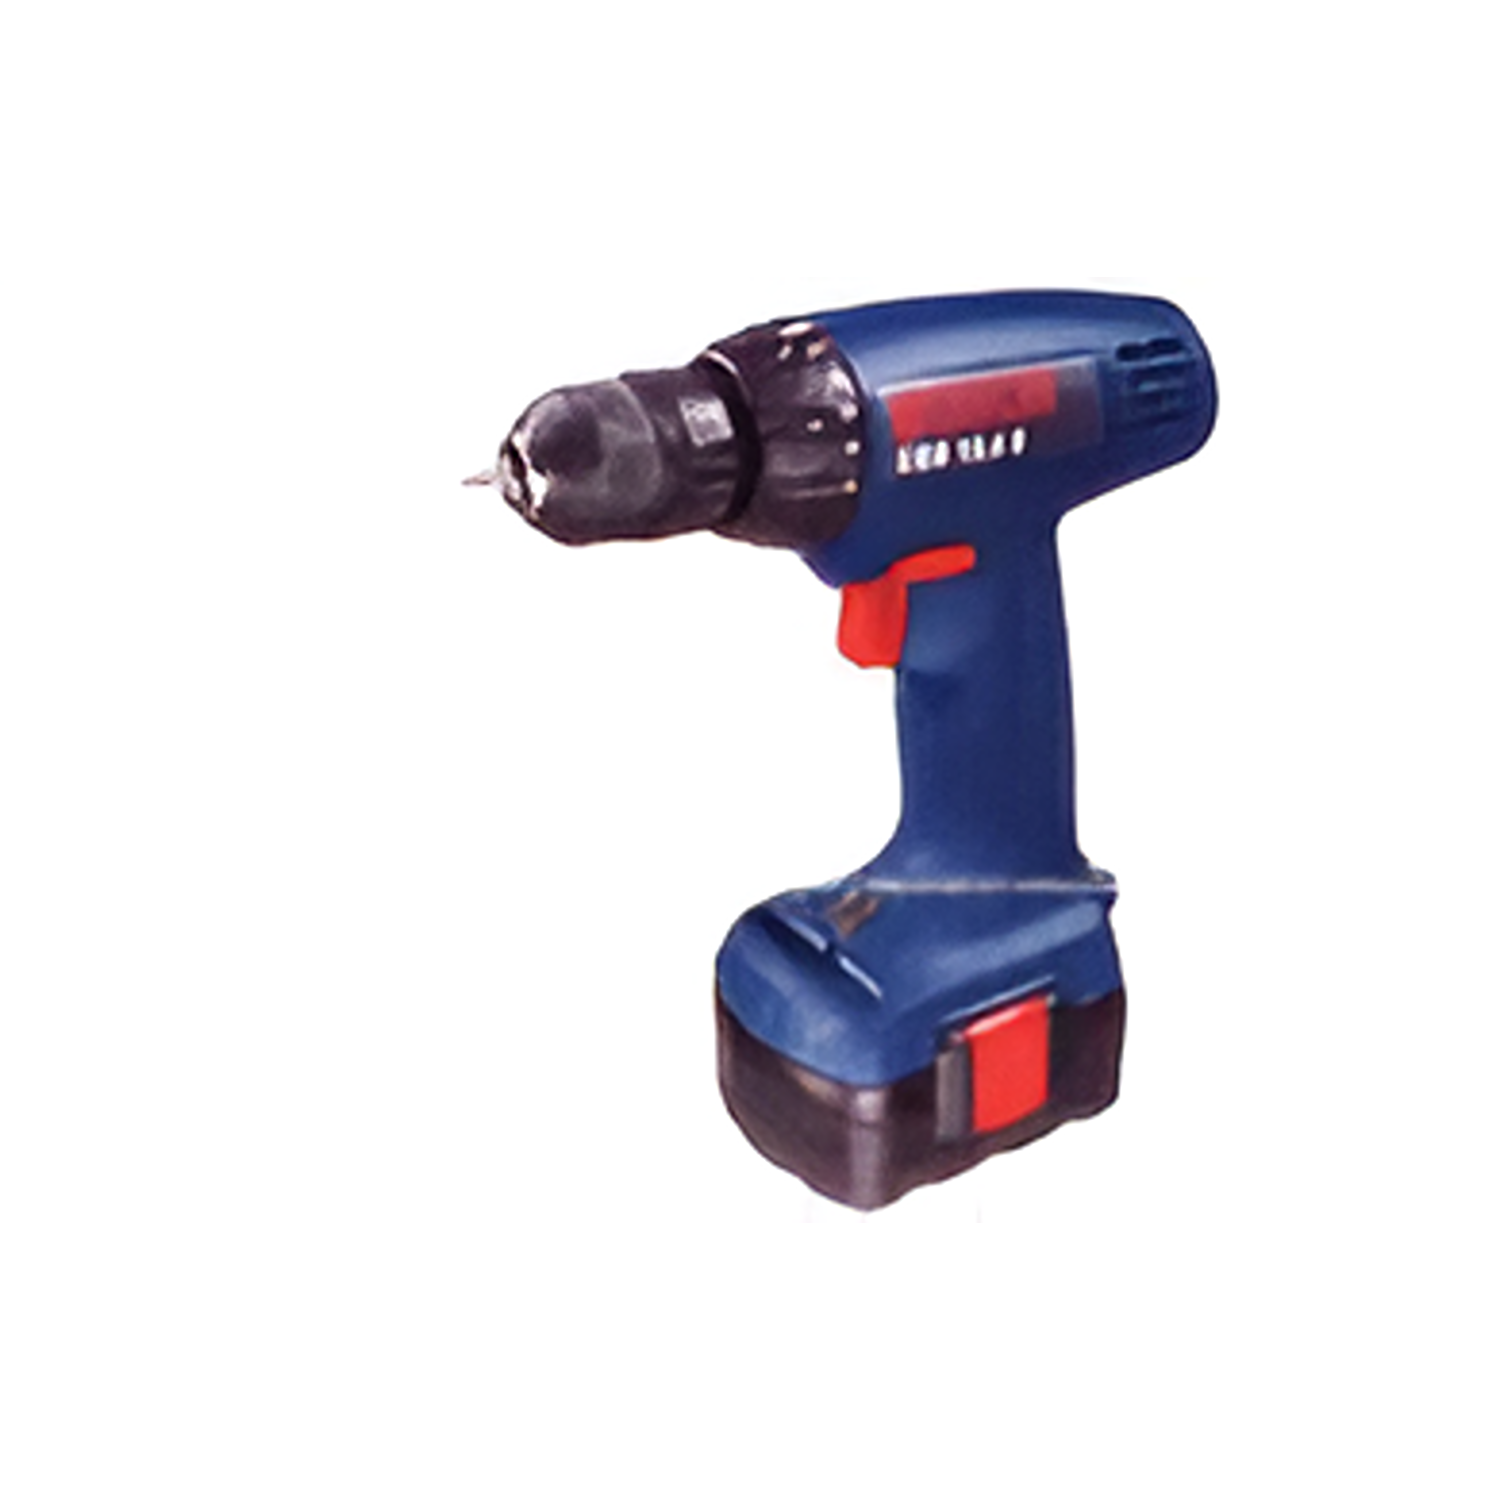 YEW AIK AC01117 Battery Screwdriver Power Tools GSR 14.4-1 - Premium Power Tools from YEW AIK - Shop now at Yew Aik.